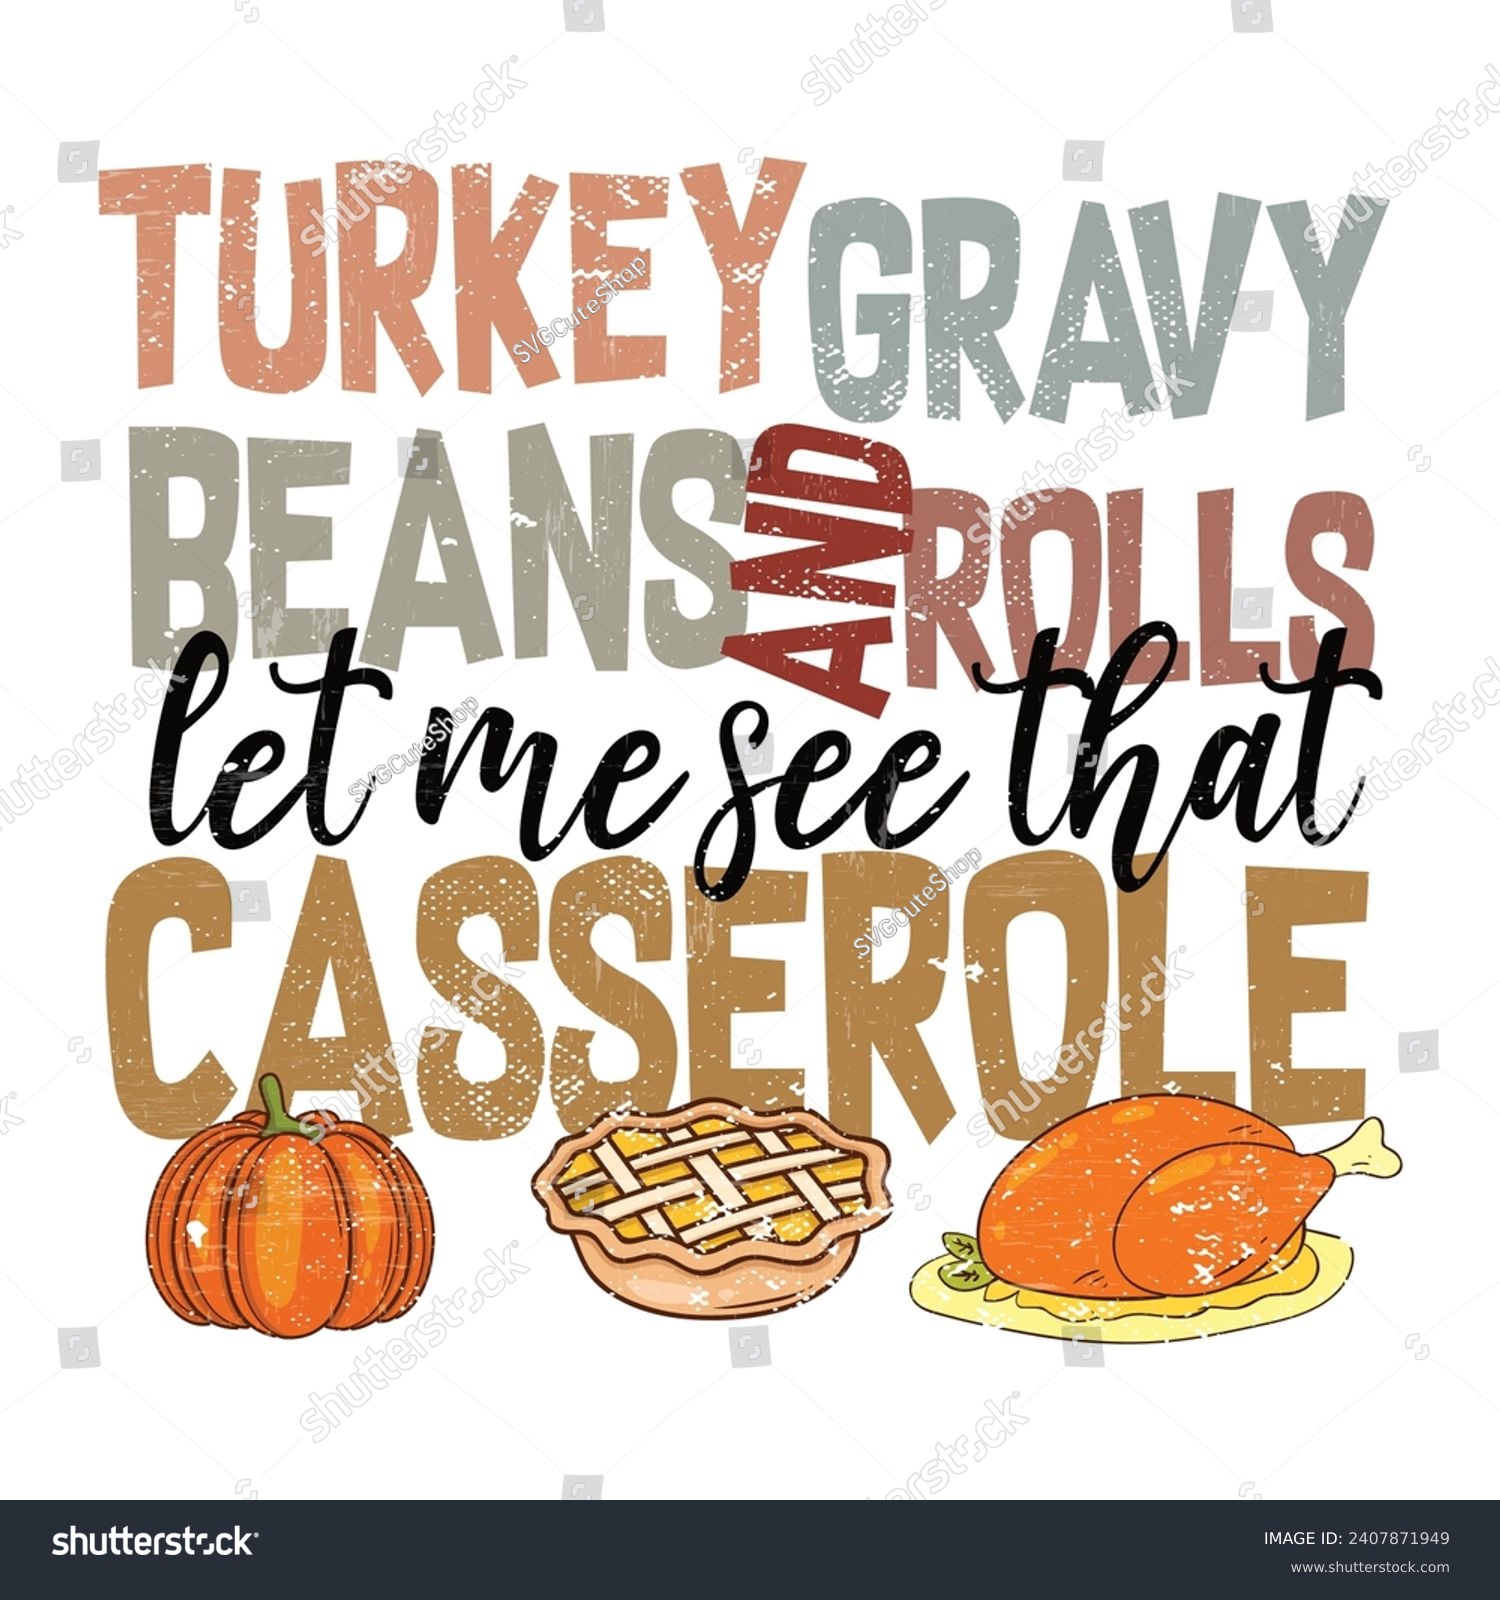 SVG of Turkey Gravy Beans And Rolls Let Me See That Casserole - Thanksgiving t-shirts design, Hand drawn lettering phrase, Calligraphy t-shirt design, Isolated on white background, Cutting Cricut File svg